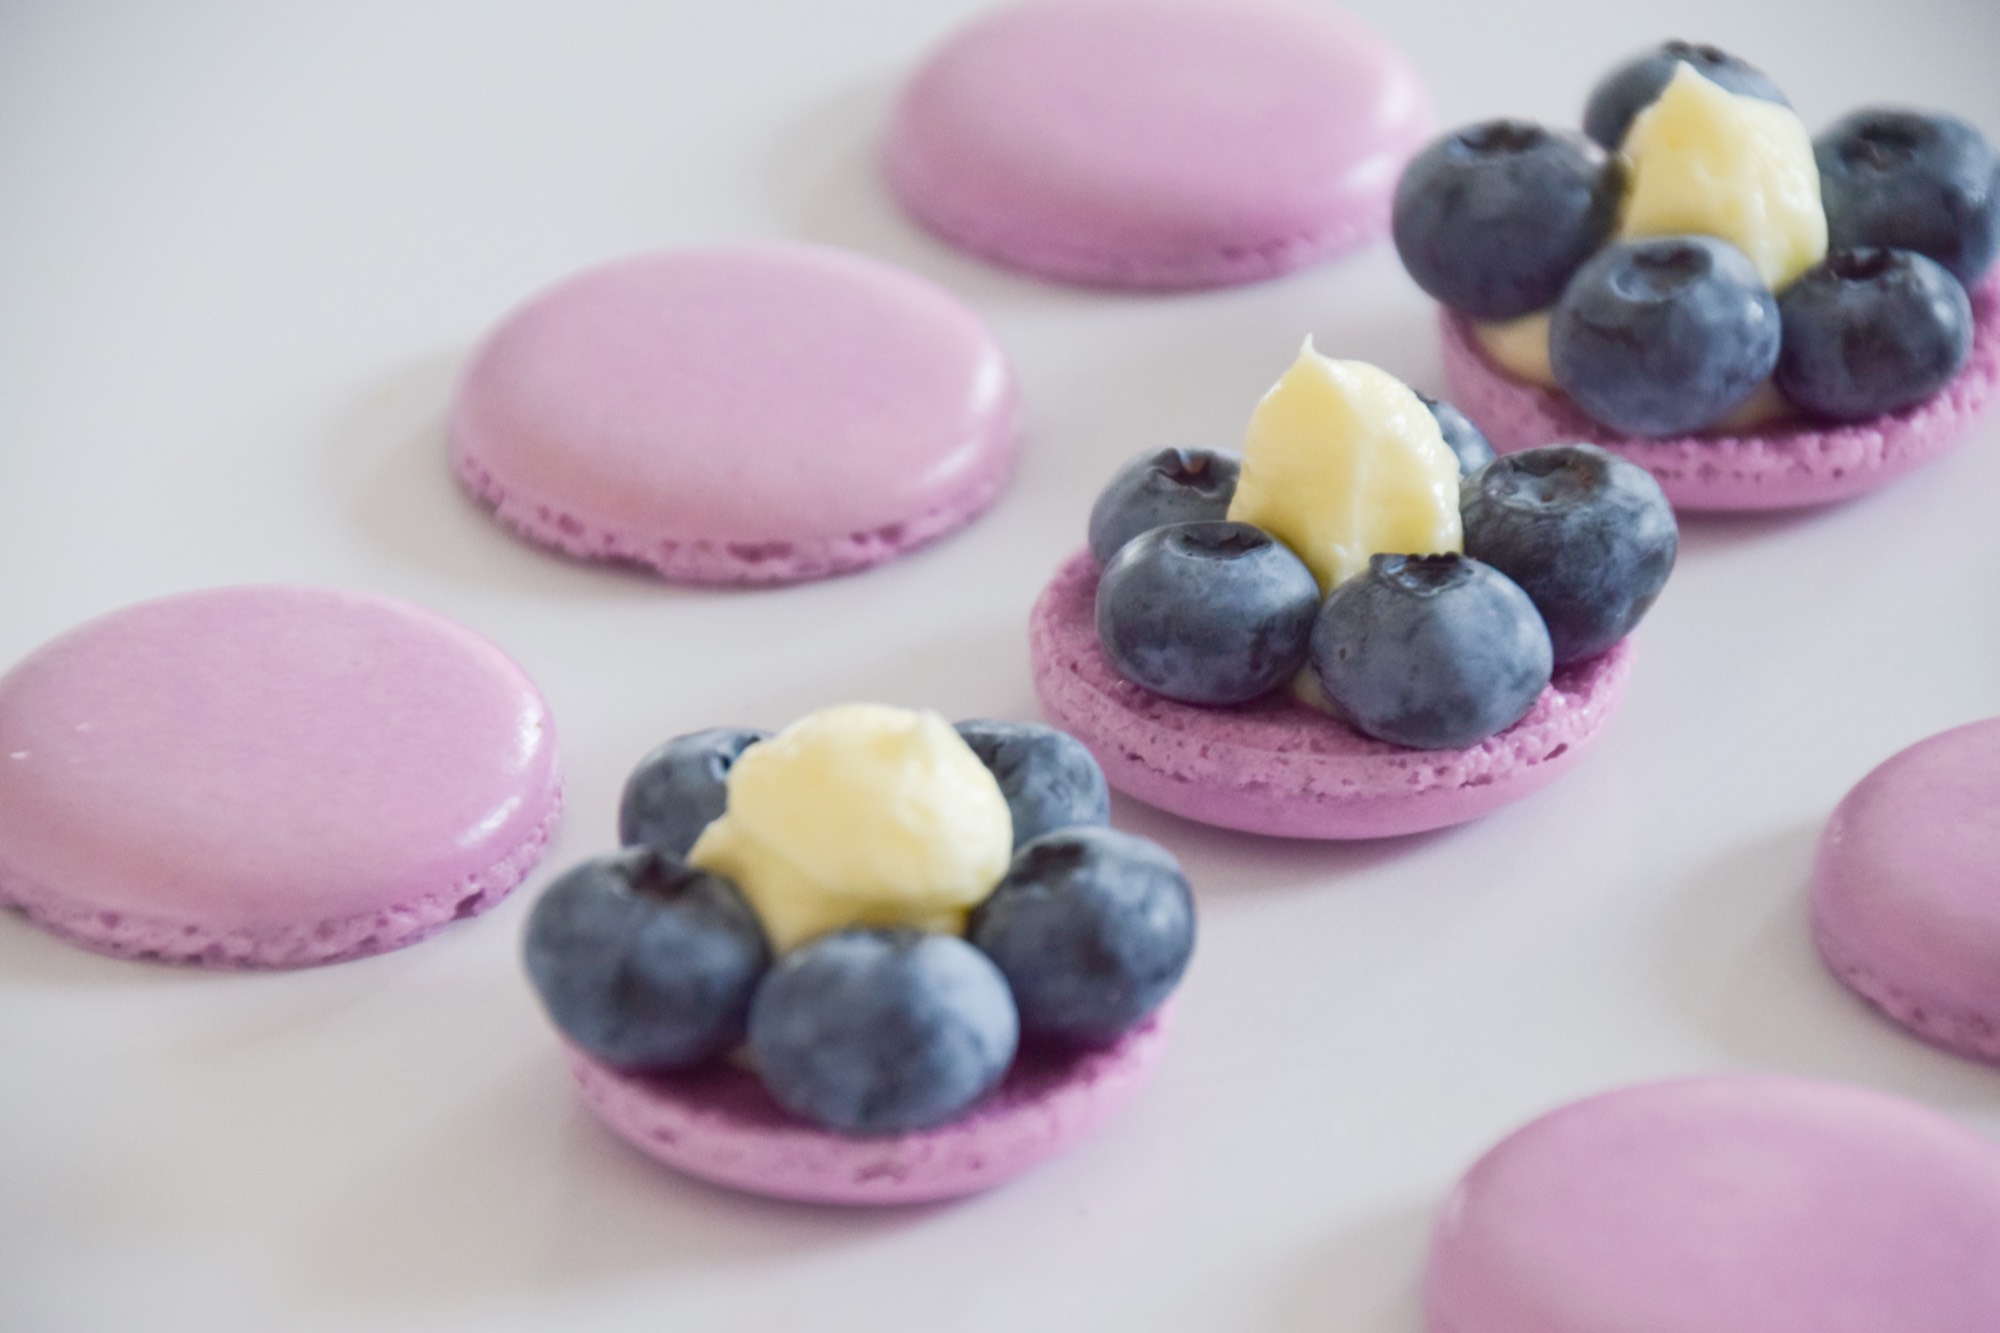 Which is Better for Baking Macarons - Parchment Paper or Silicone Mat? -  Baking with Belli